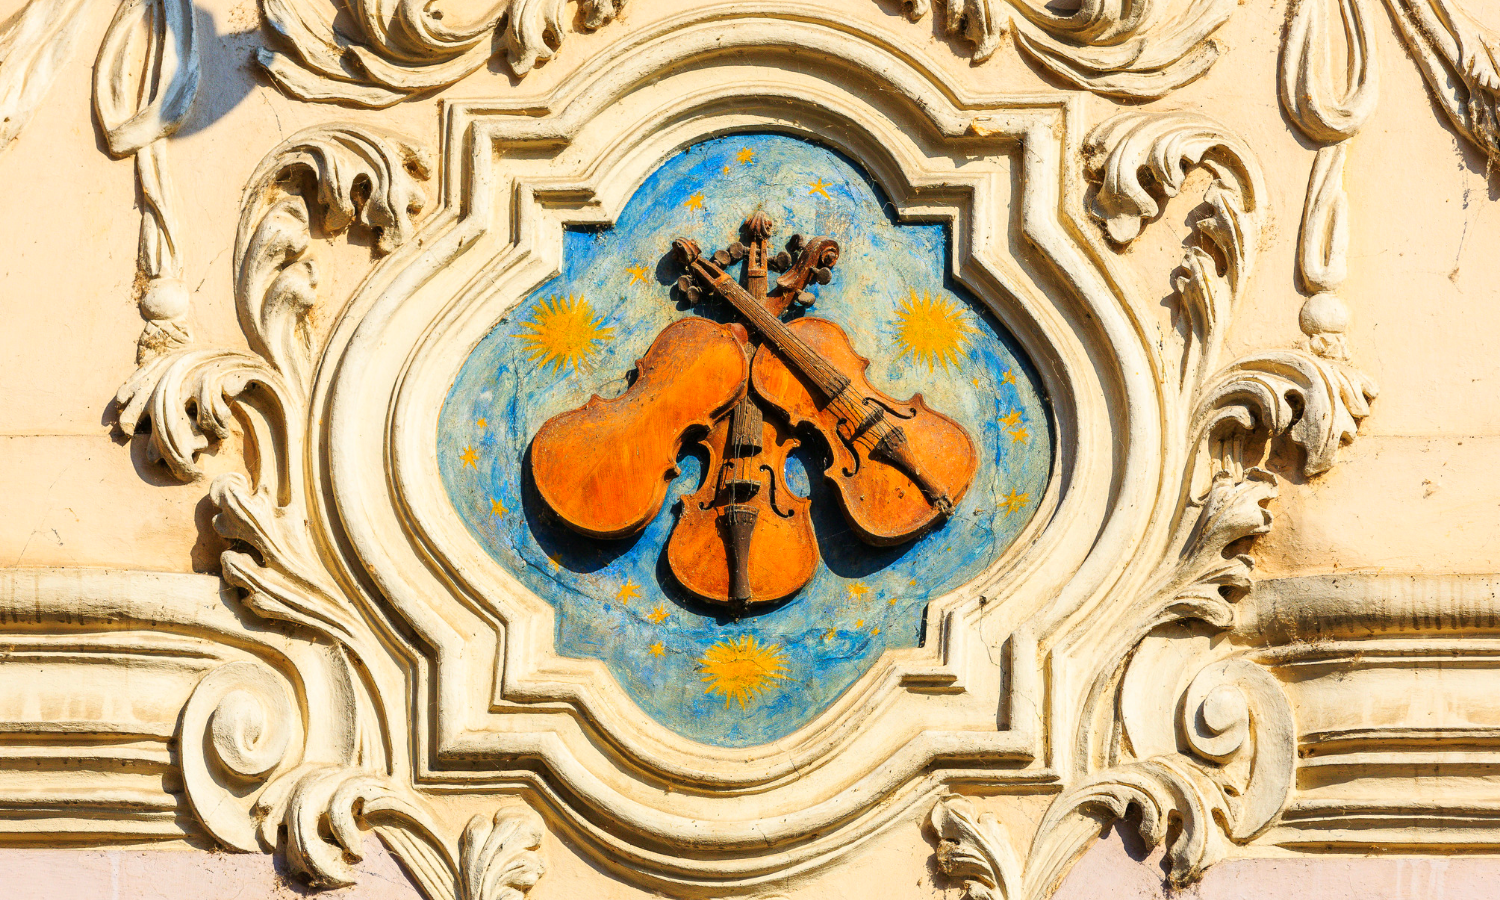 An image of music in Prague